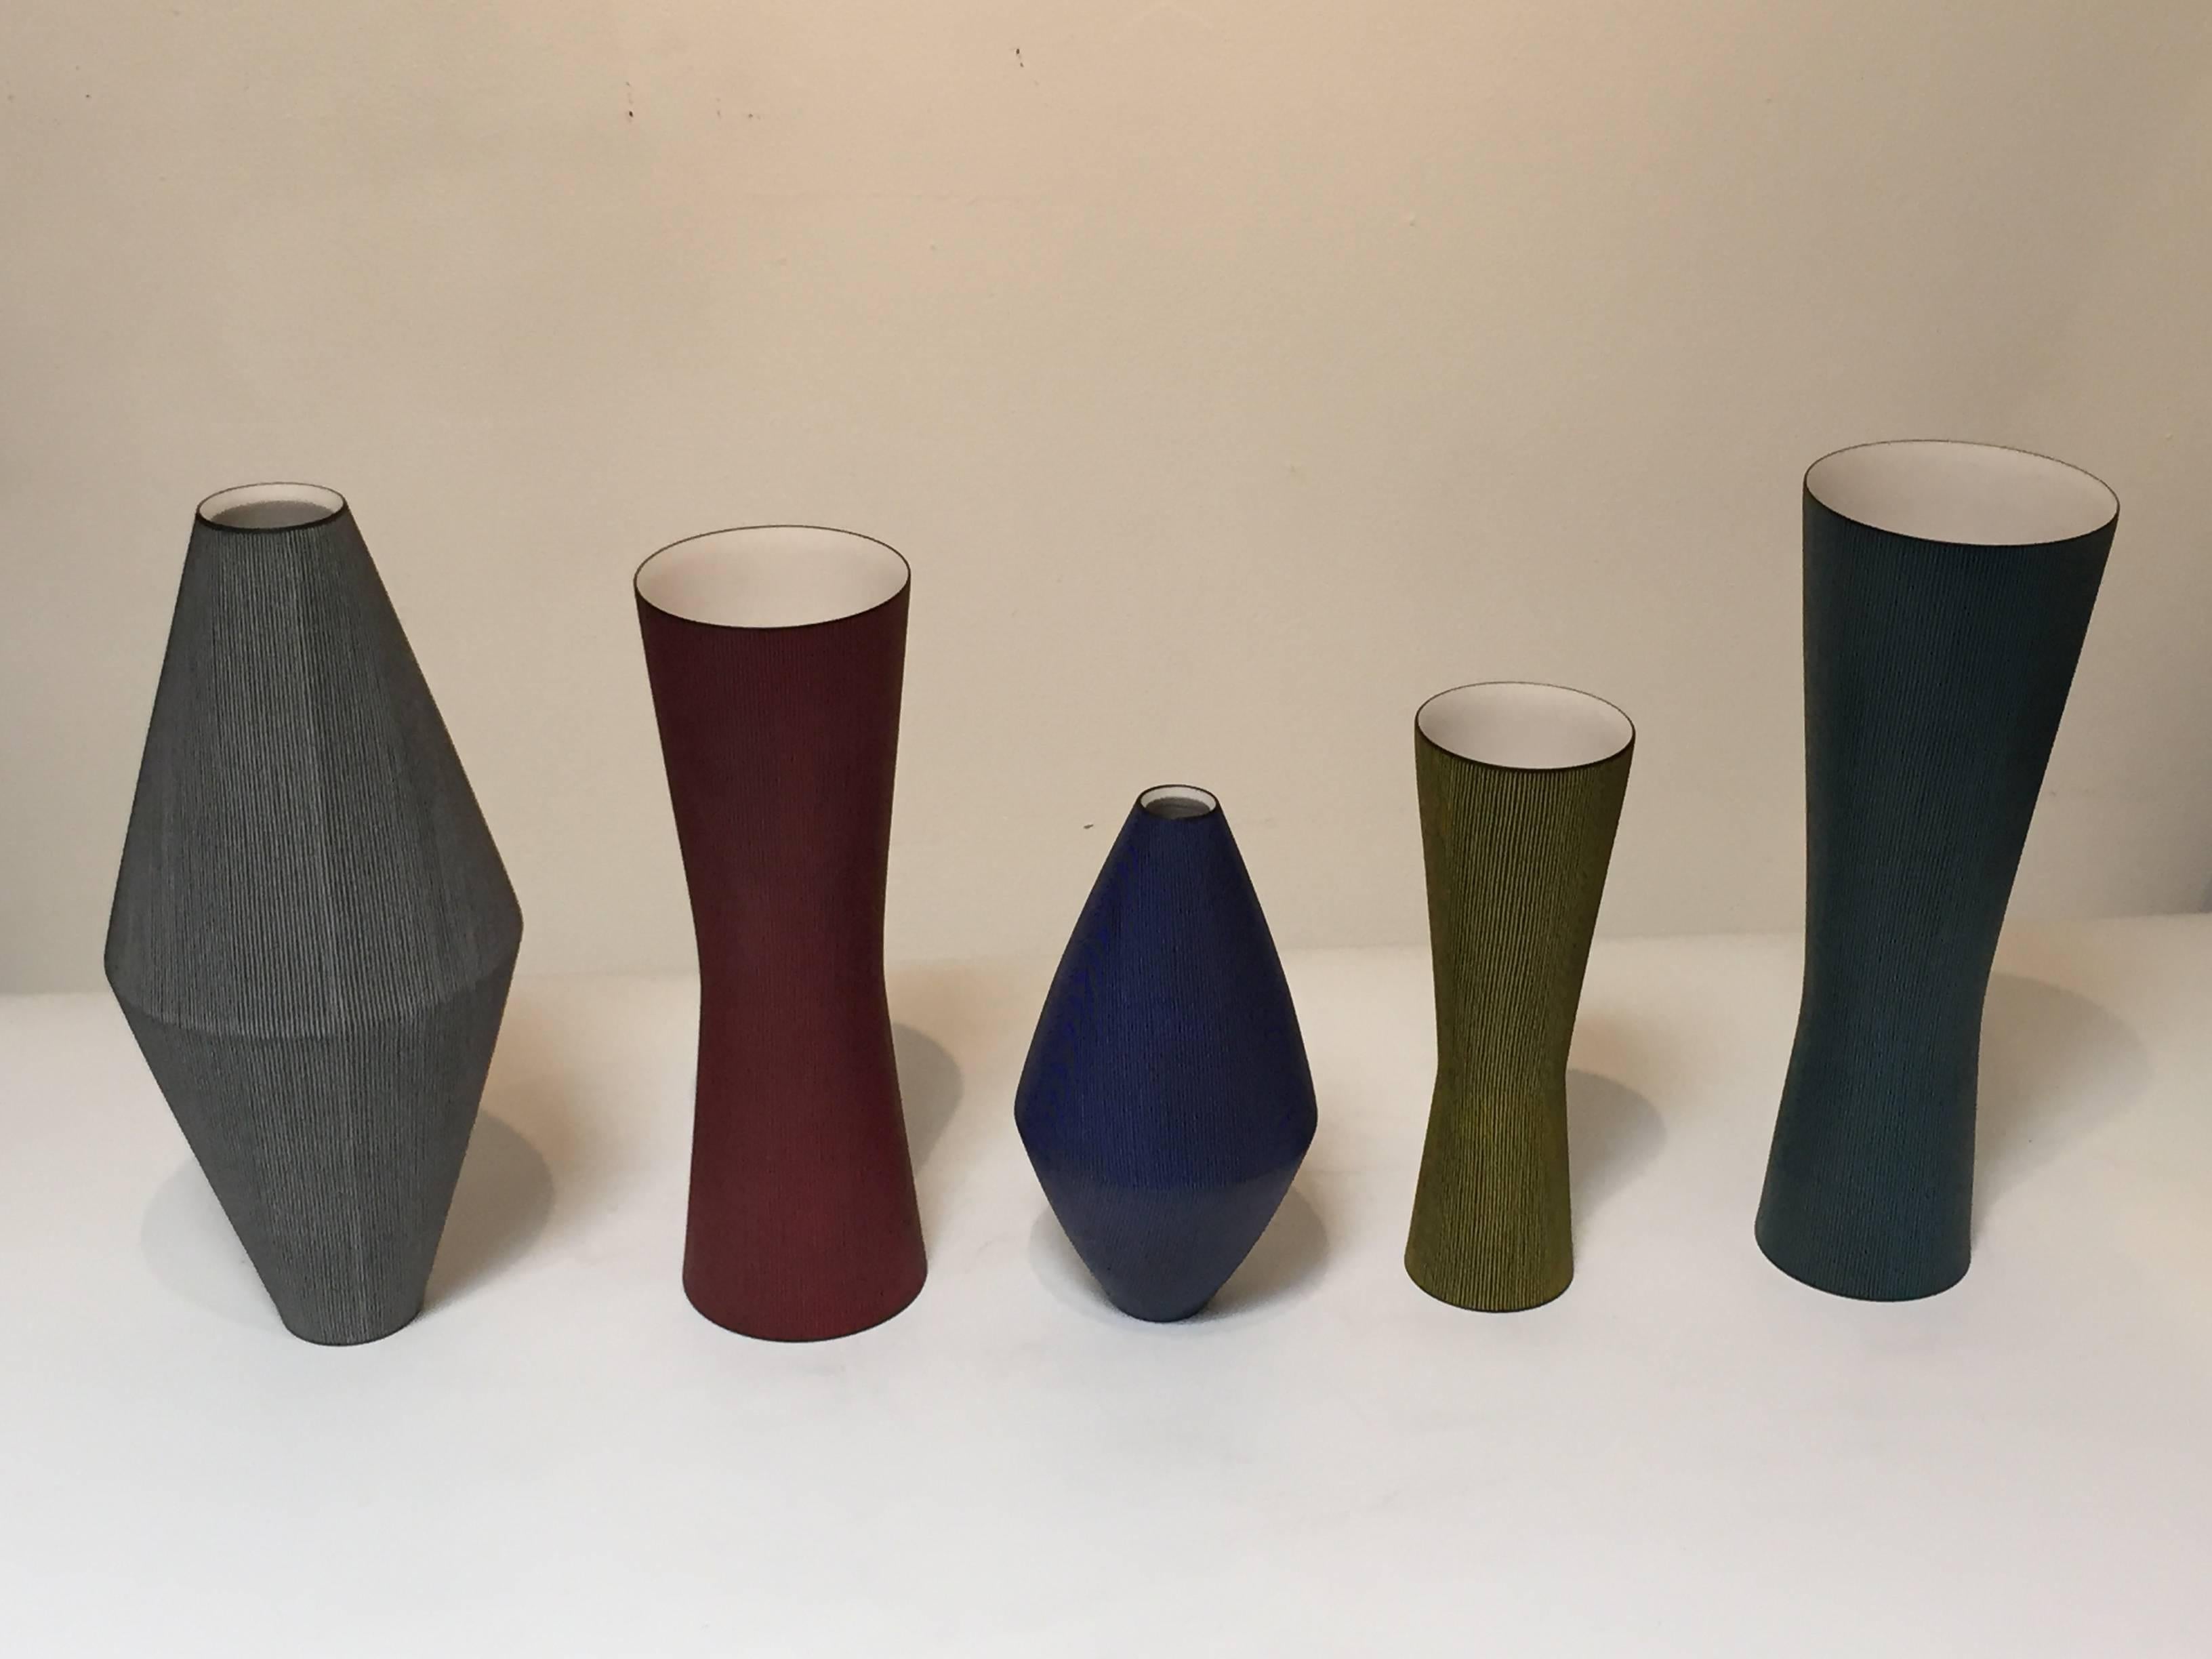 Group of Five Contemporary Porcelain Vases by Japanese Artist Masaru Nakada 6